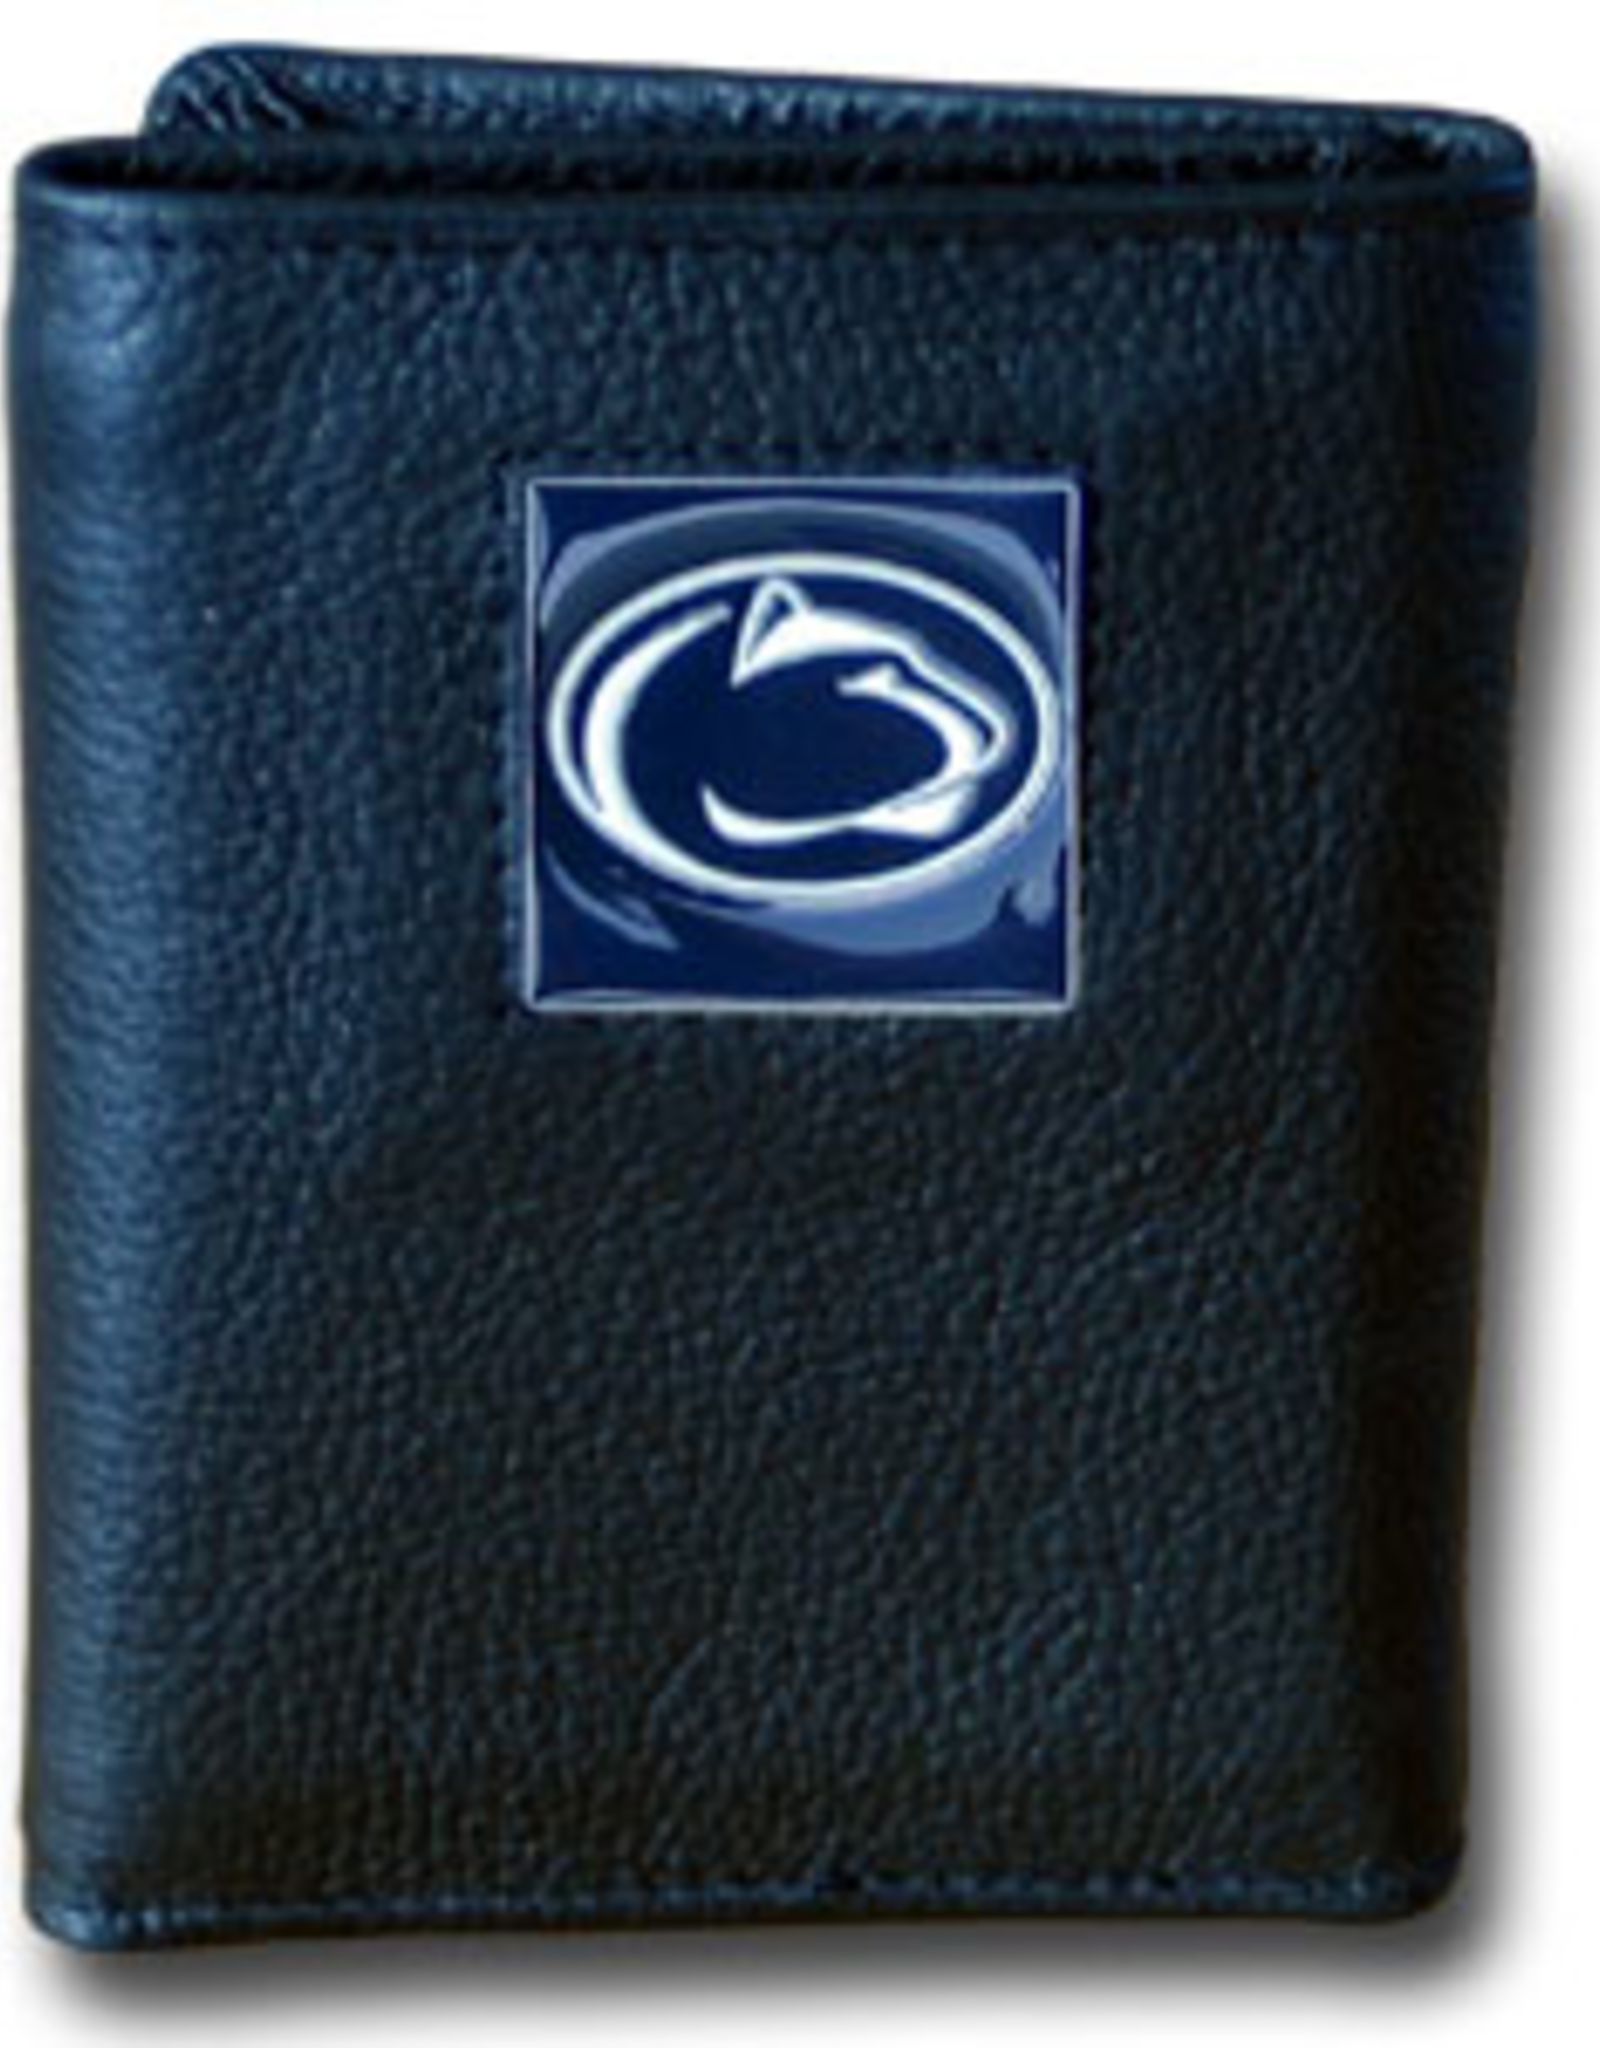 SISKIYOU GIFTS Penn State Nittany Lions Executive Leather Trifold Wallet